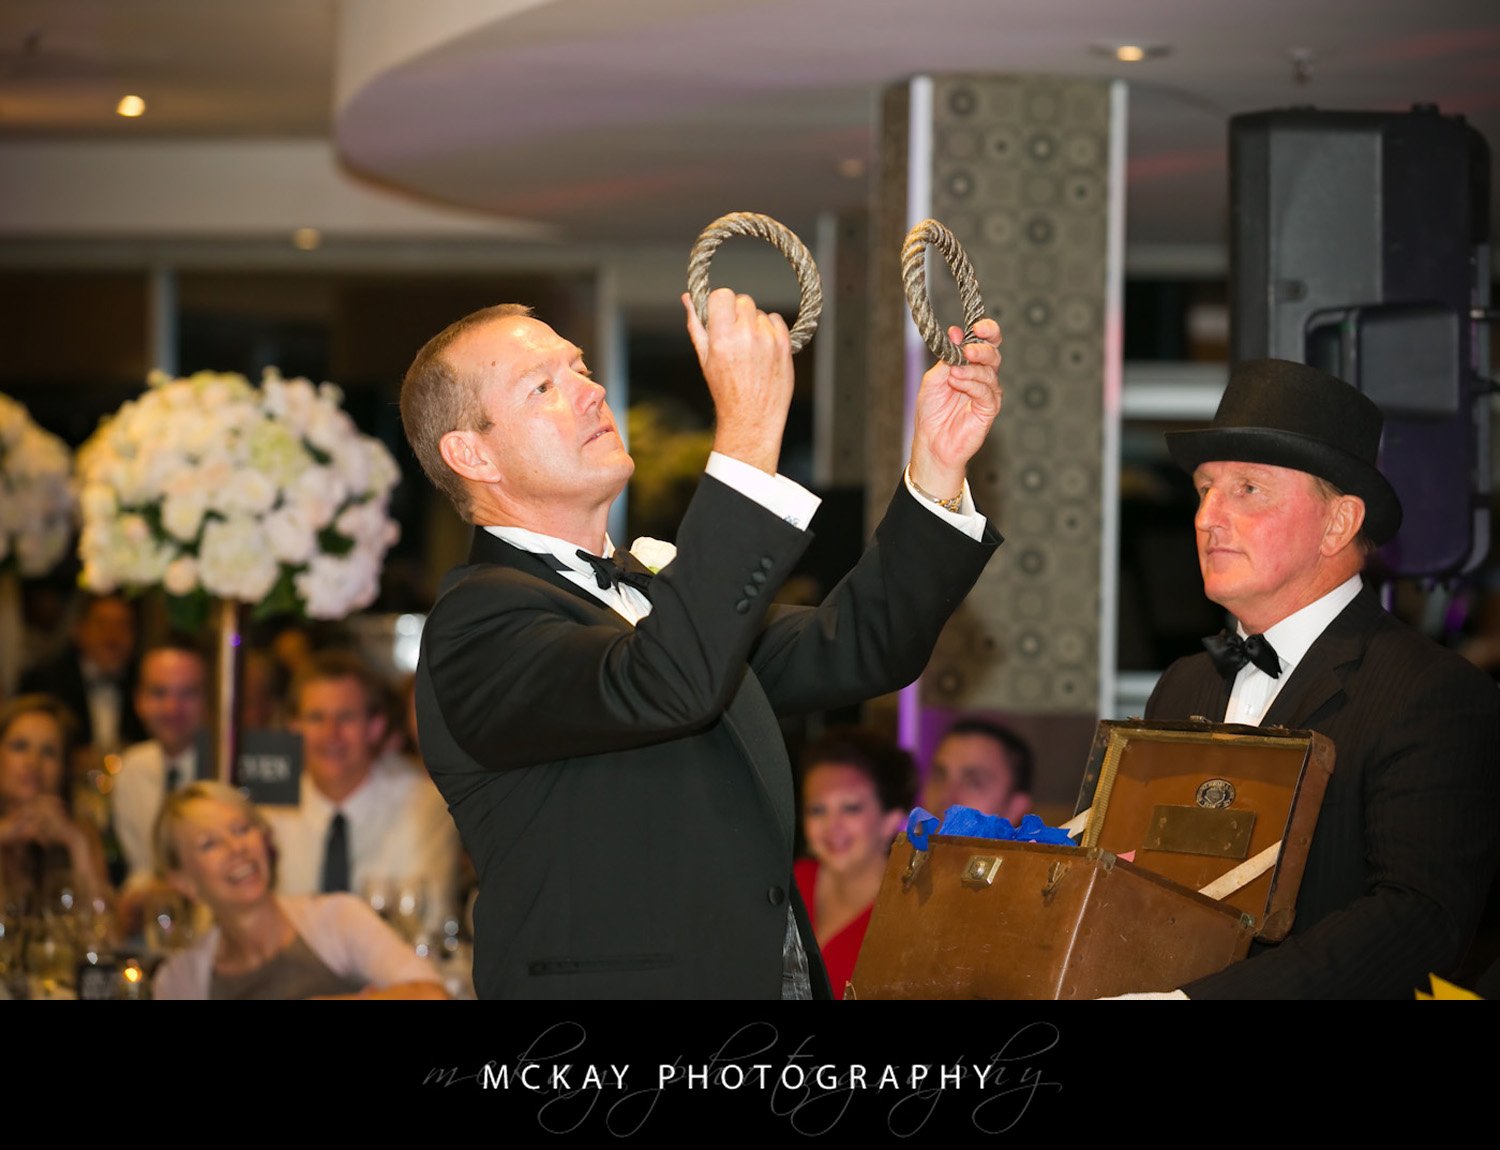 A feature of the reception was the quoits game between bridesmaids & groomsmen Kate David Wedding 